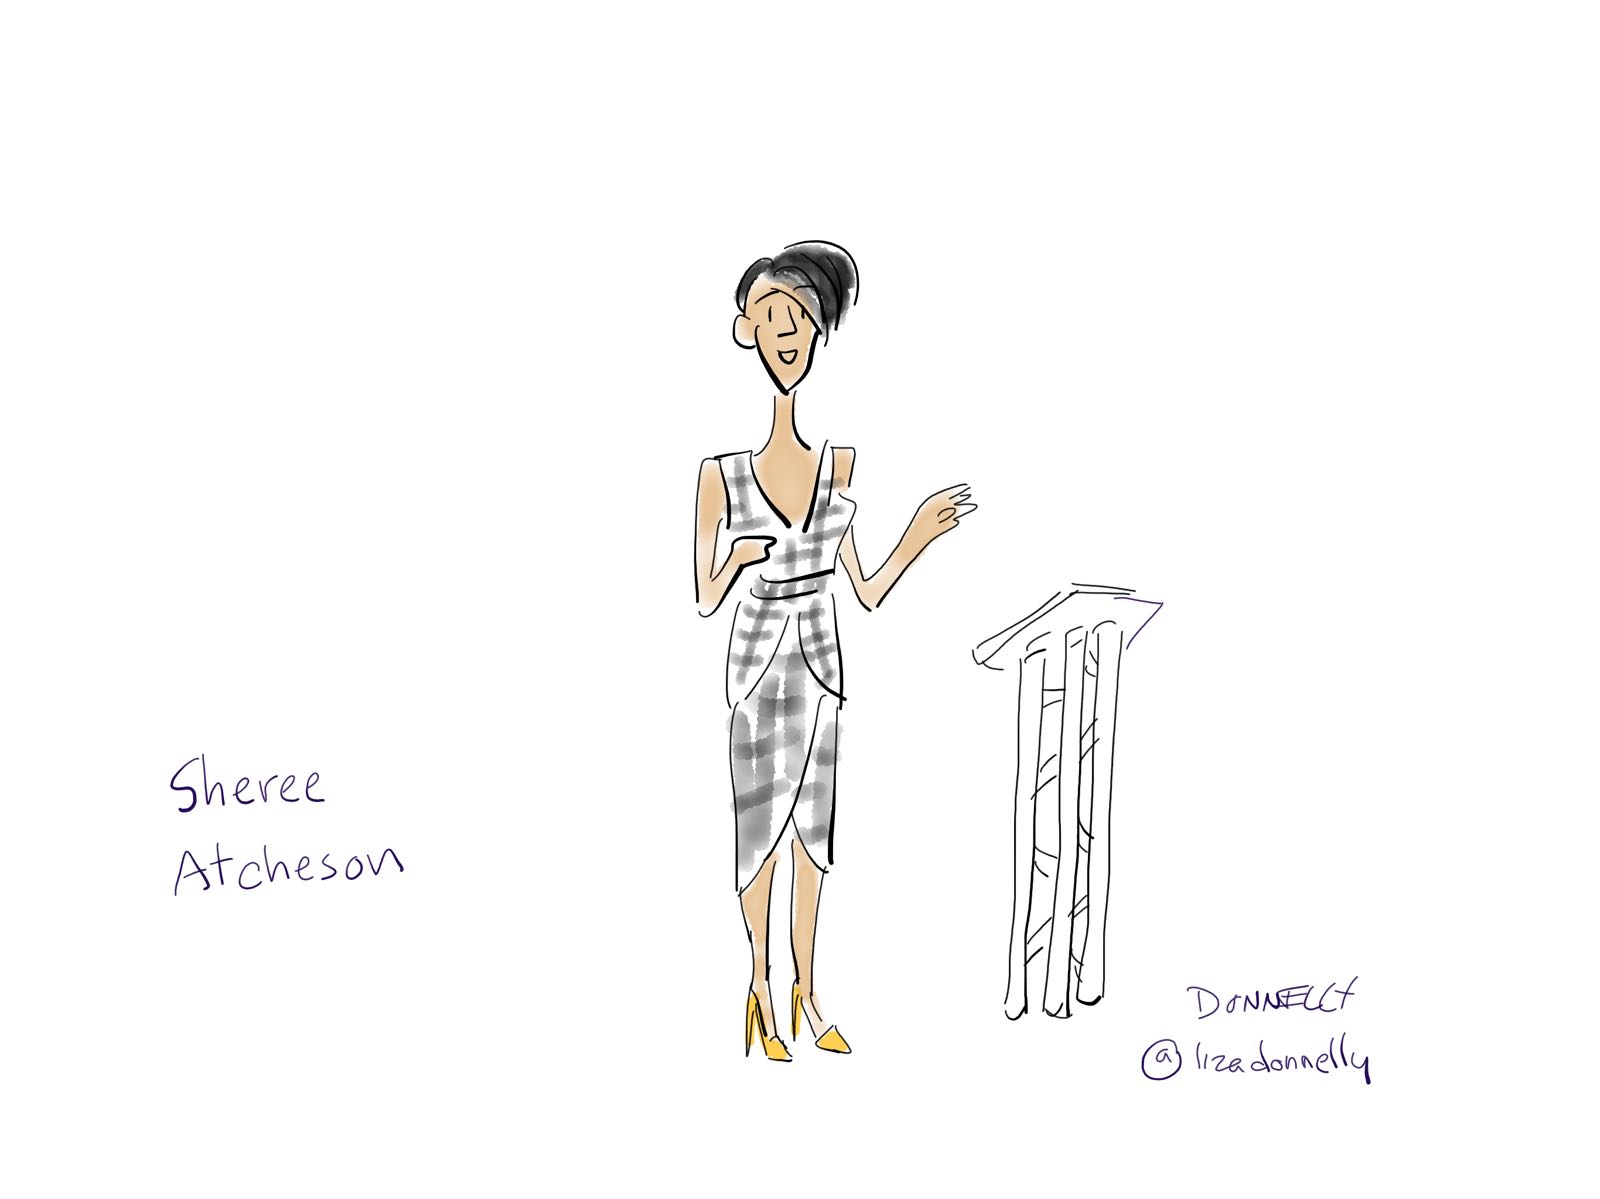 An illustration of Sheree Atcheson by Liza Donnelly.